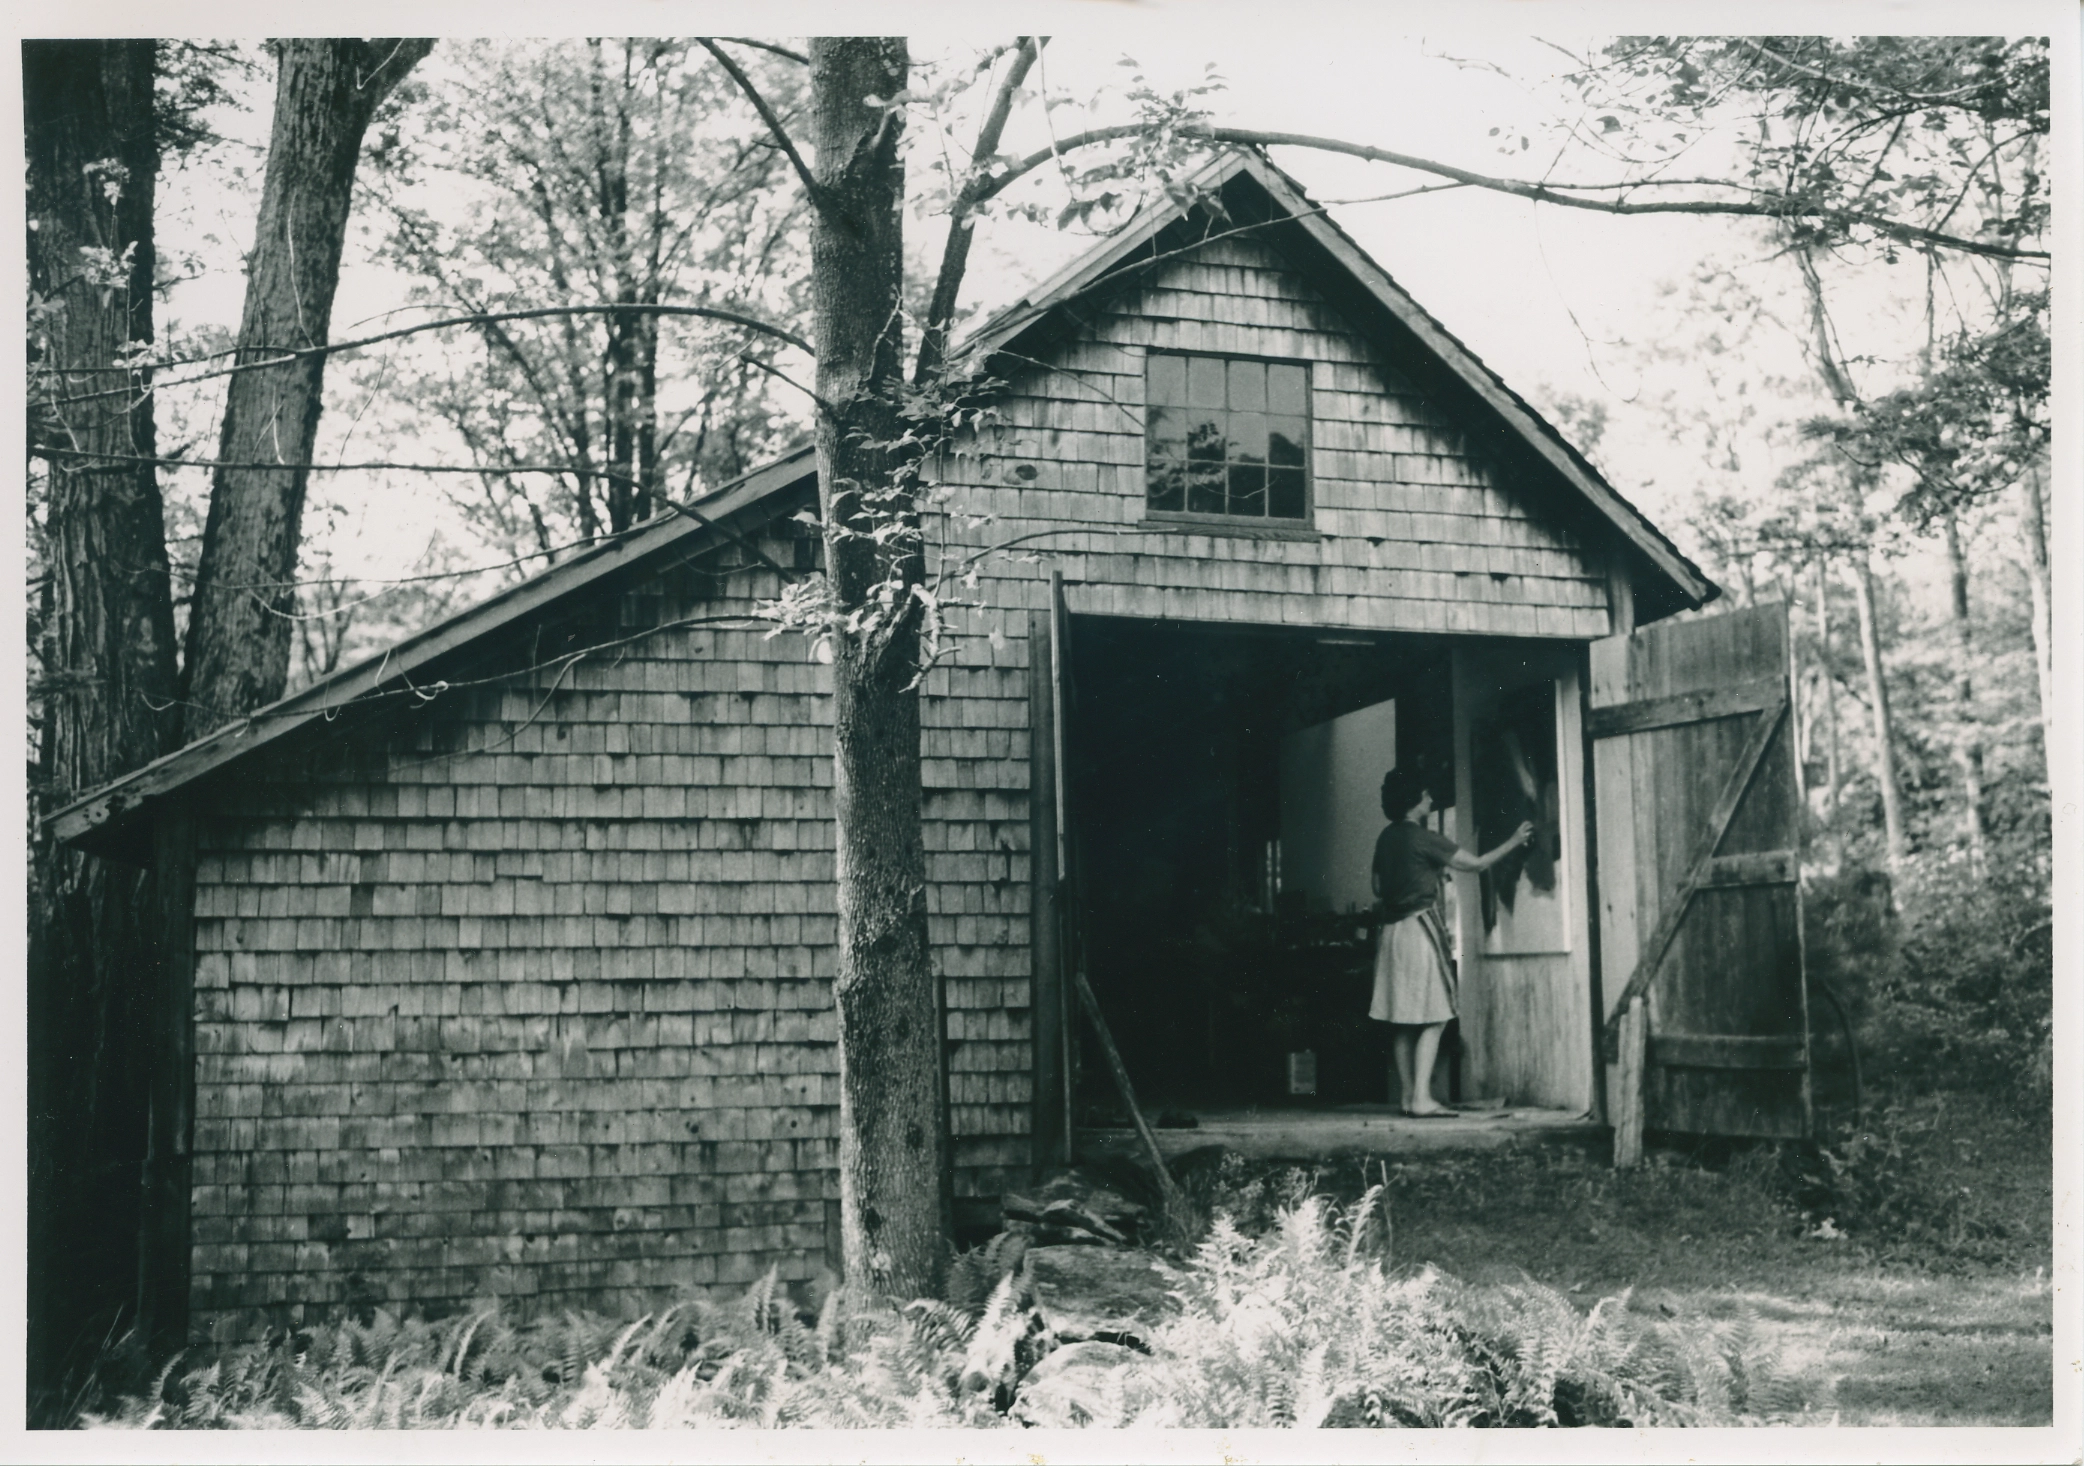 Black and white photograph of barn in the woods among trees and plants. The double barn doors are open, revealing a woman inside, painting on a canvas.